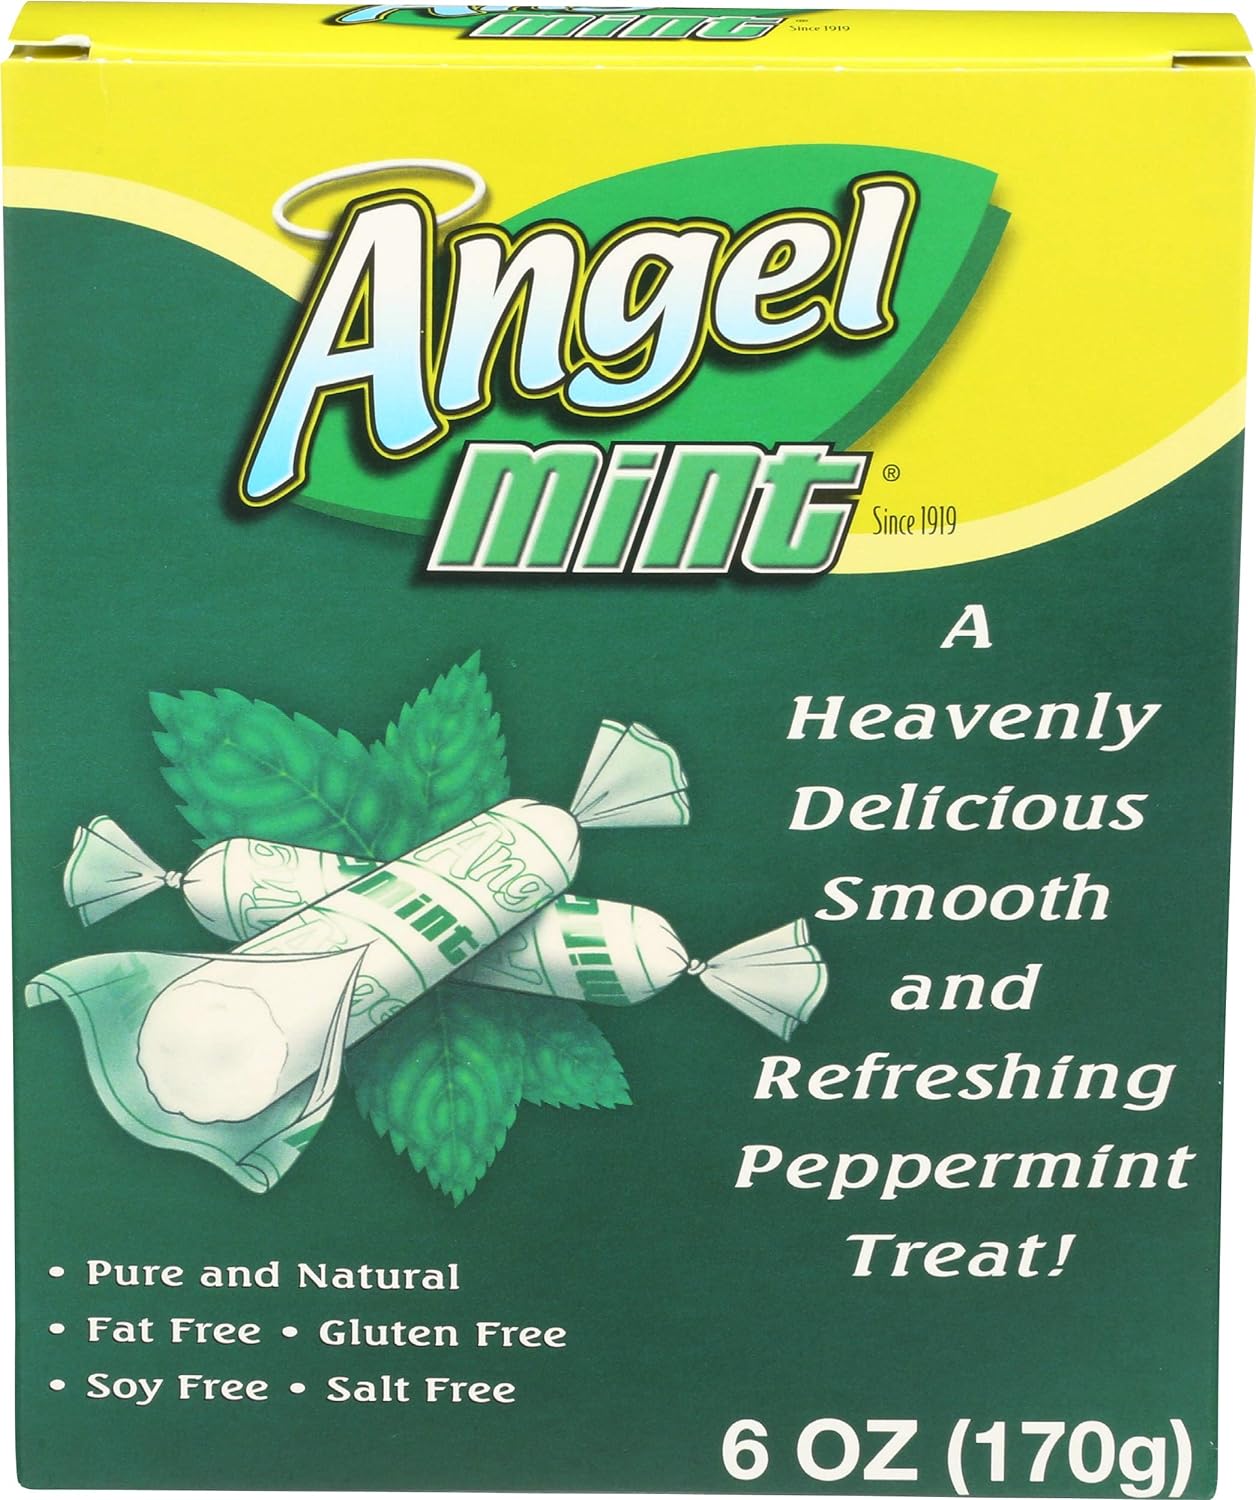 Angel Mints Original Peppermints, Individually Wrapped, All Natural, 6 oz Box